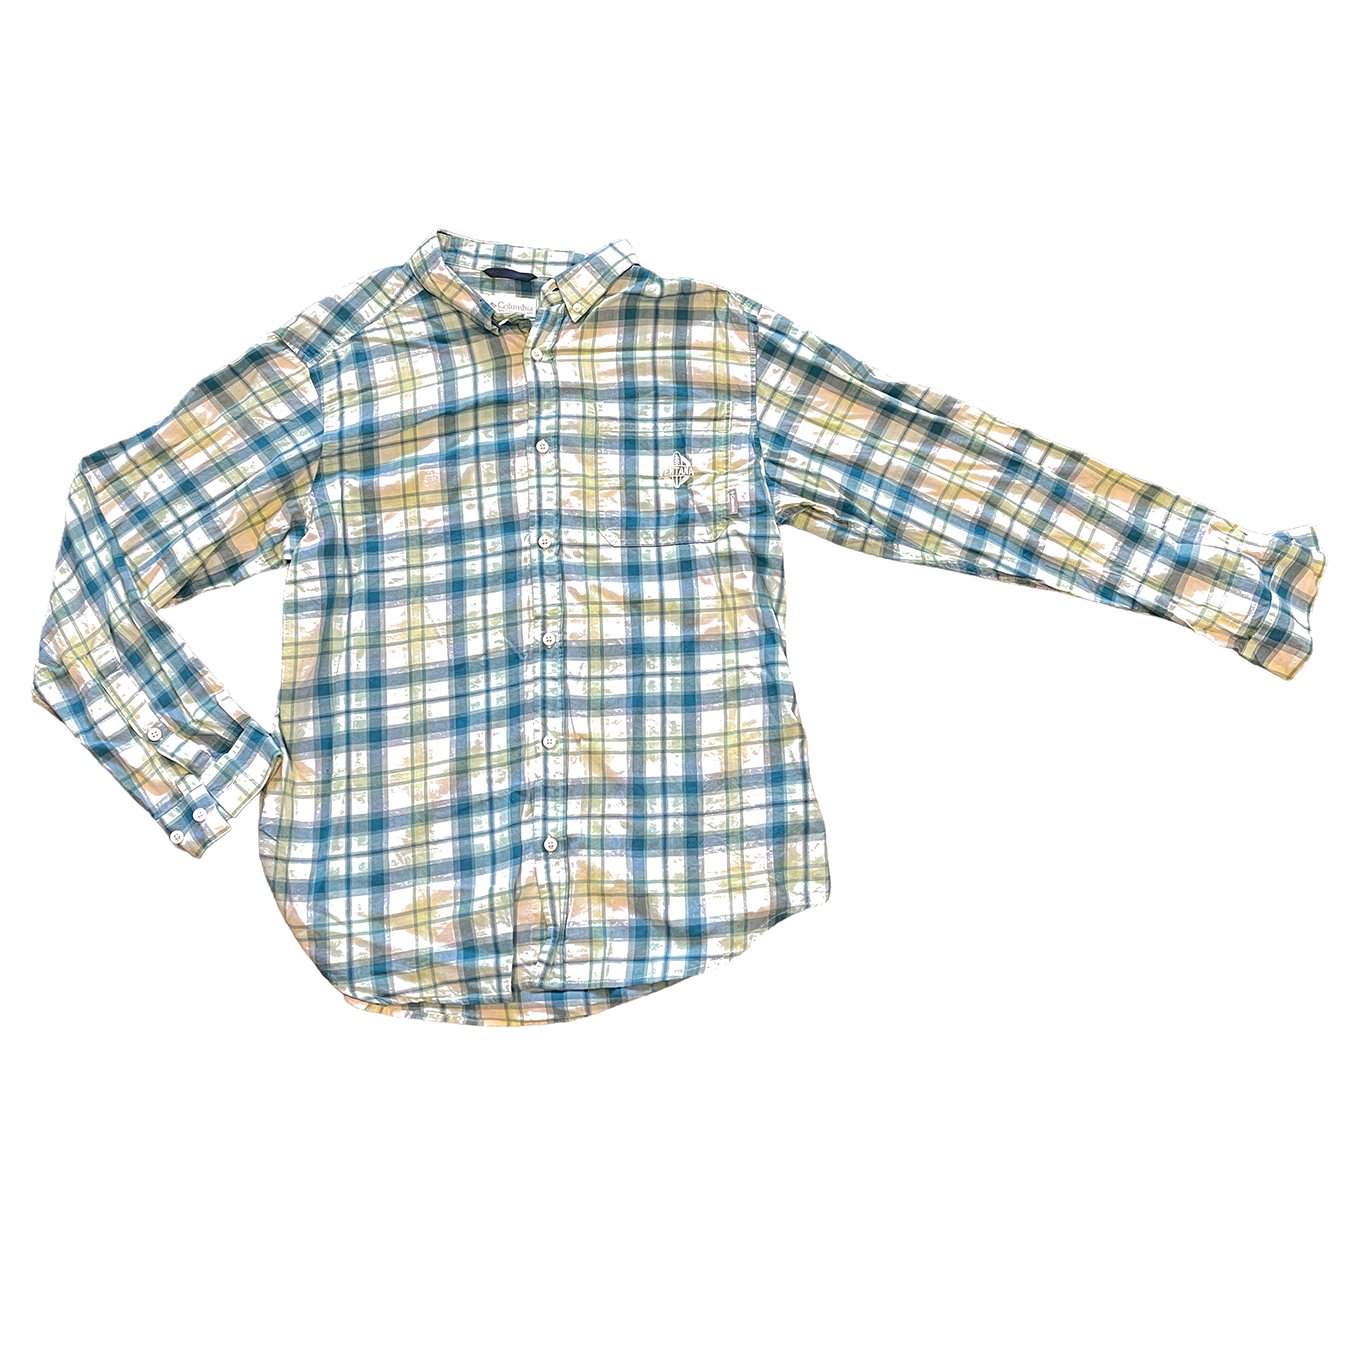 Shirts - Reclaimed Flannel Large: Ventana Monterey Bay By Thiago Bianchini